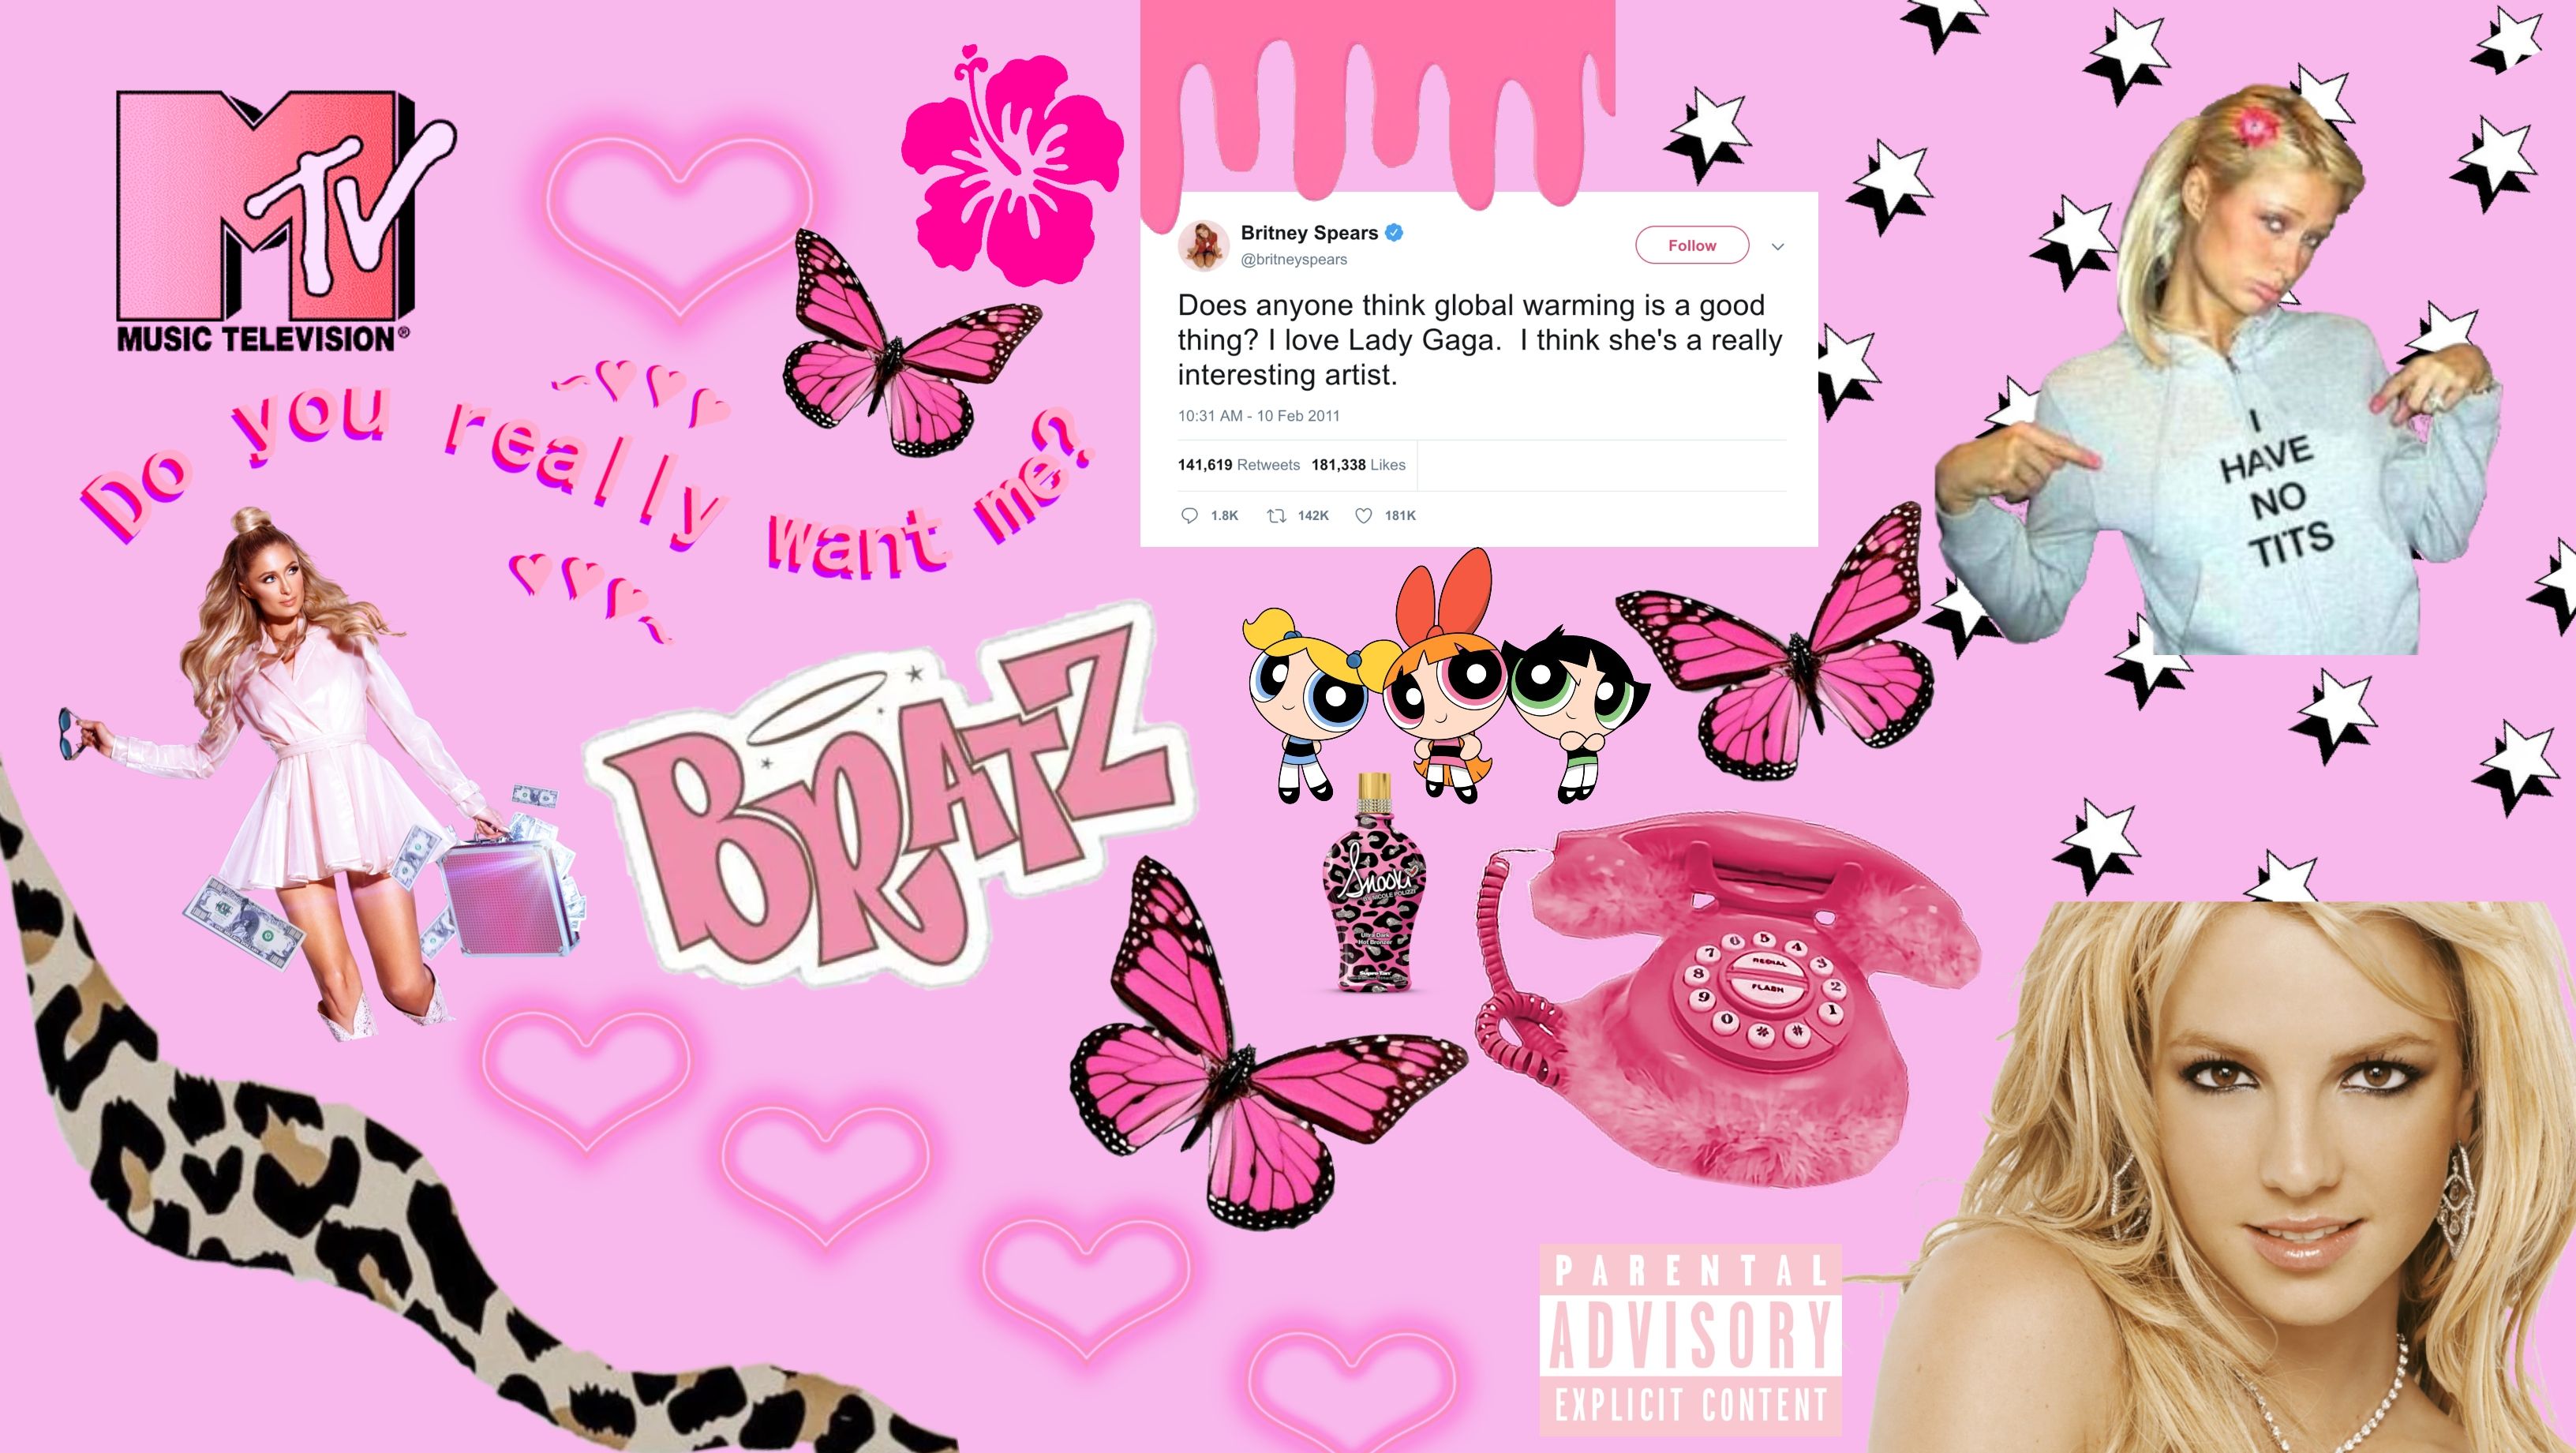 Pin by Veronica on Pretty Pics  Trashy y2k aesthetic, 2000s pink